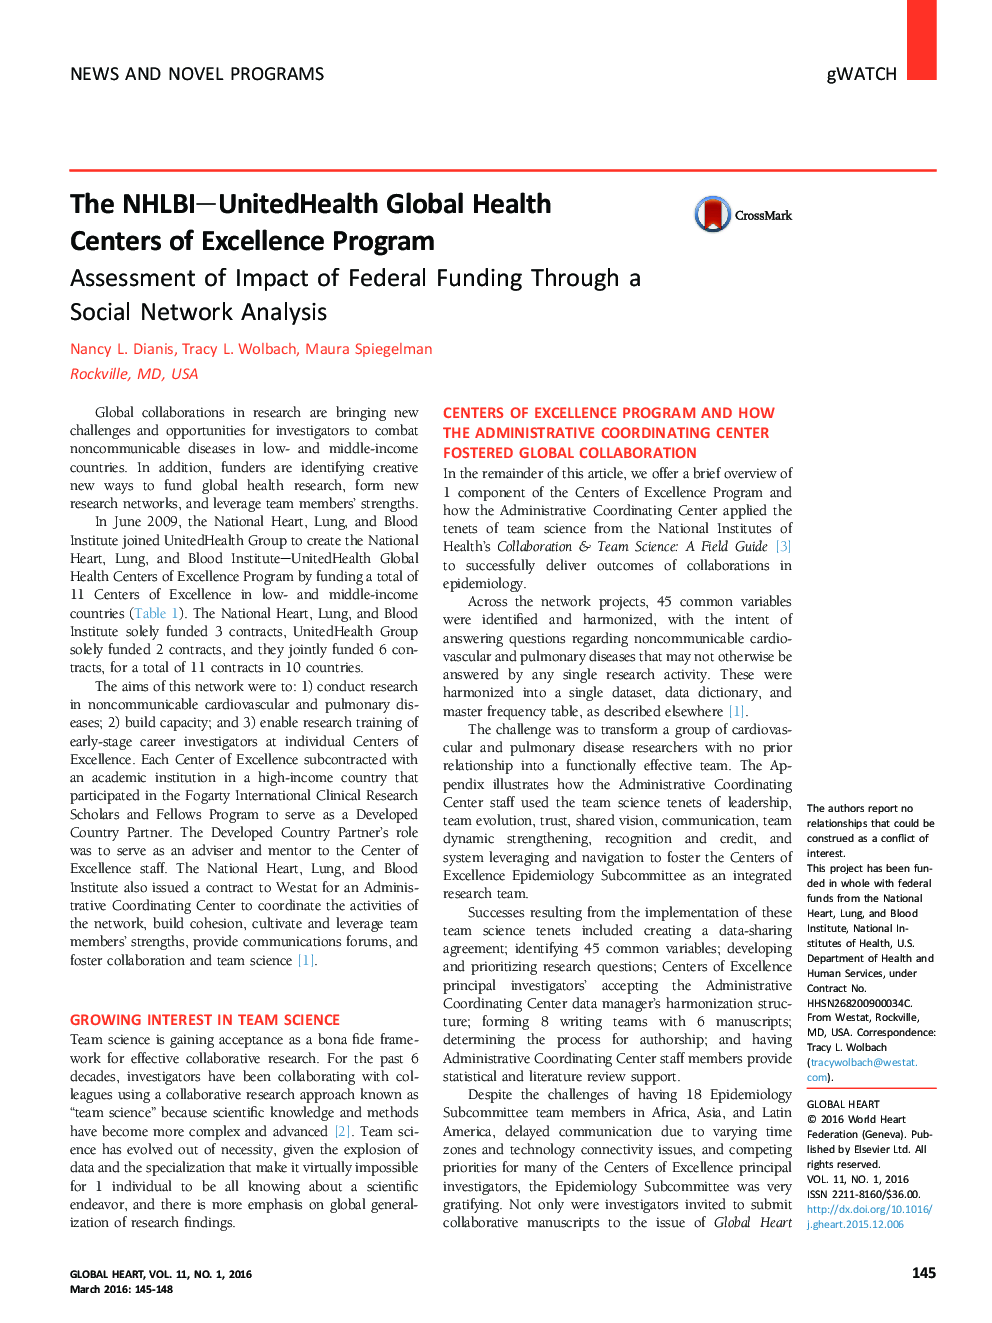 The NHLBI-UnitedHealth Global Health Centers of ExcellenceÂ Program: Assessment of Impact of Federal Funding Through a Social Network Analysis